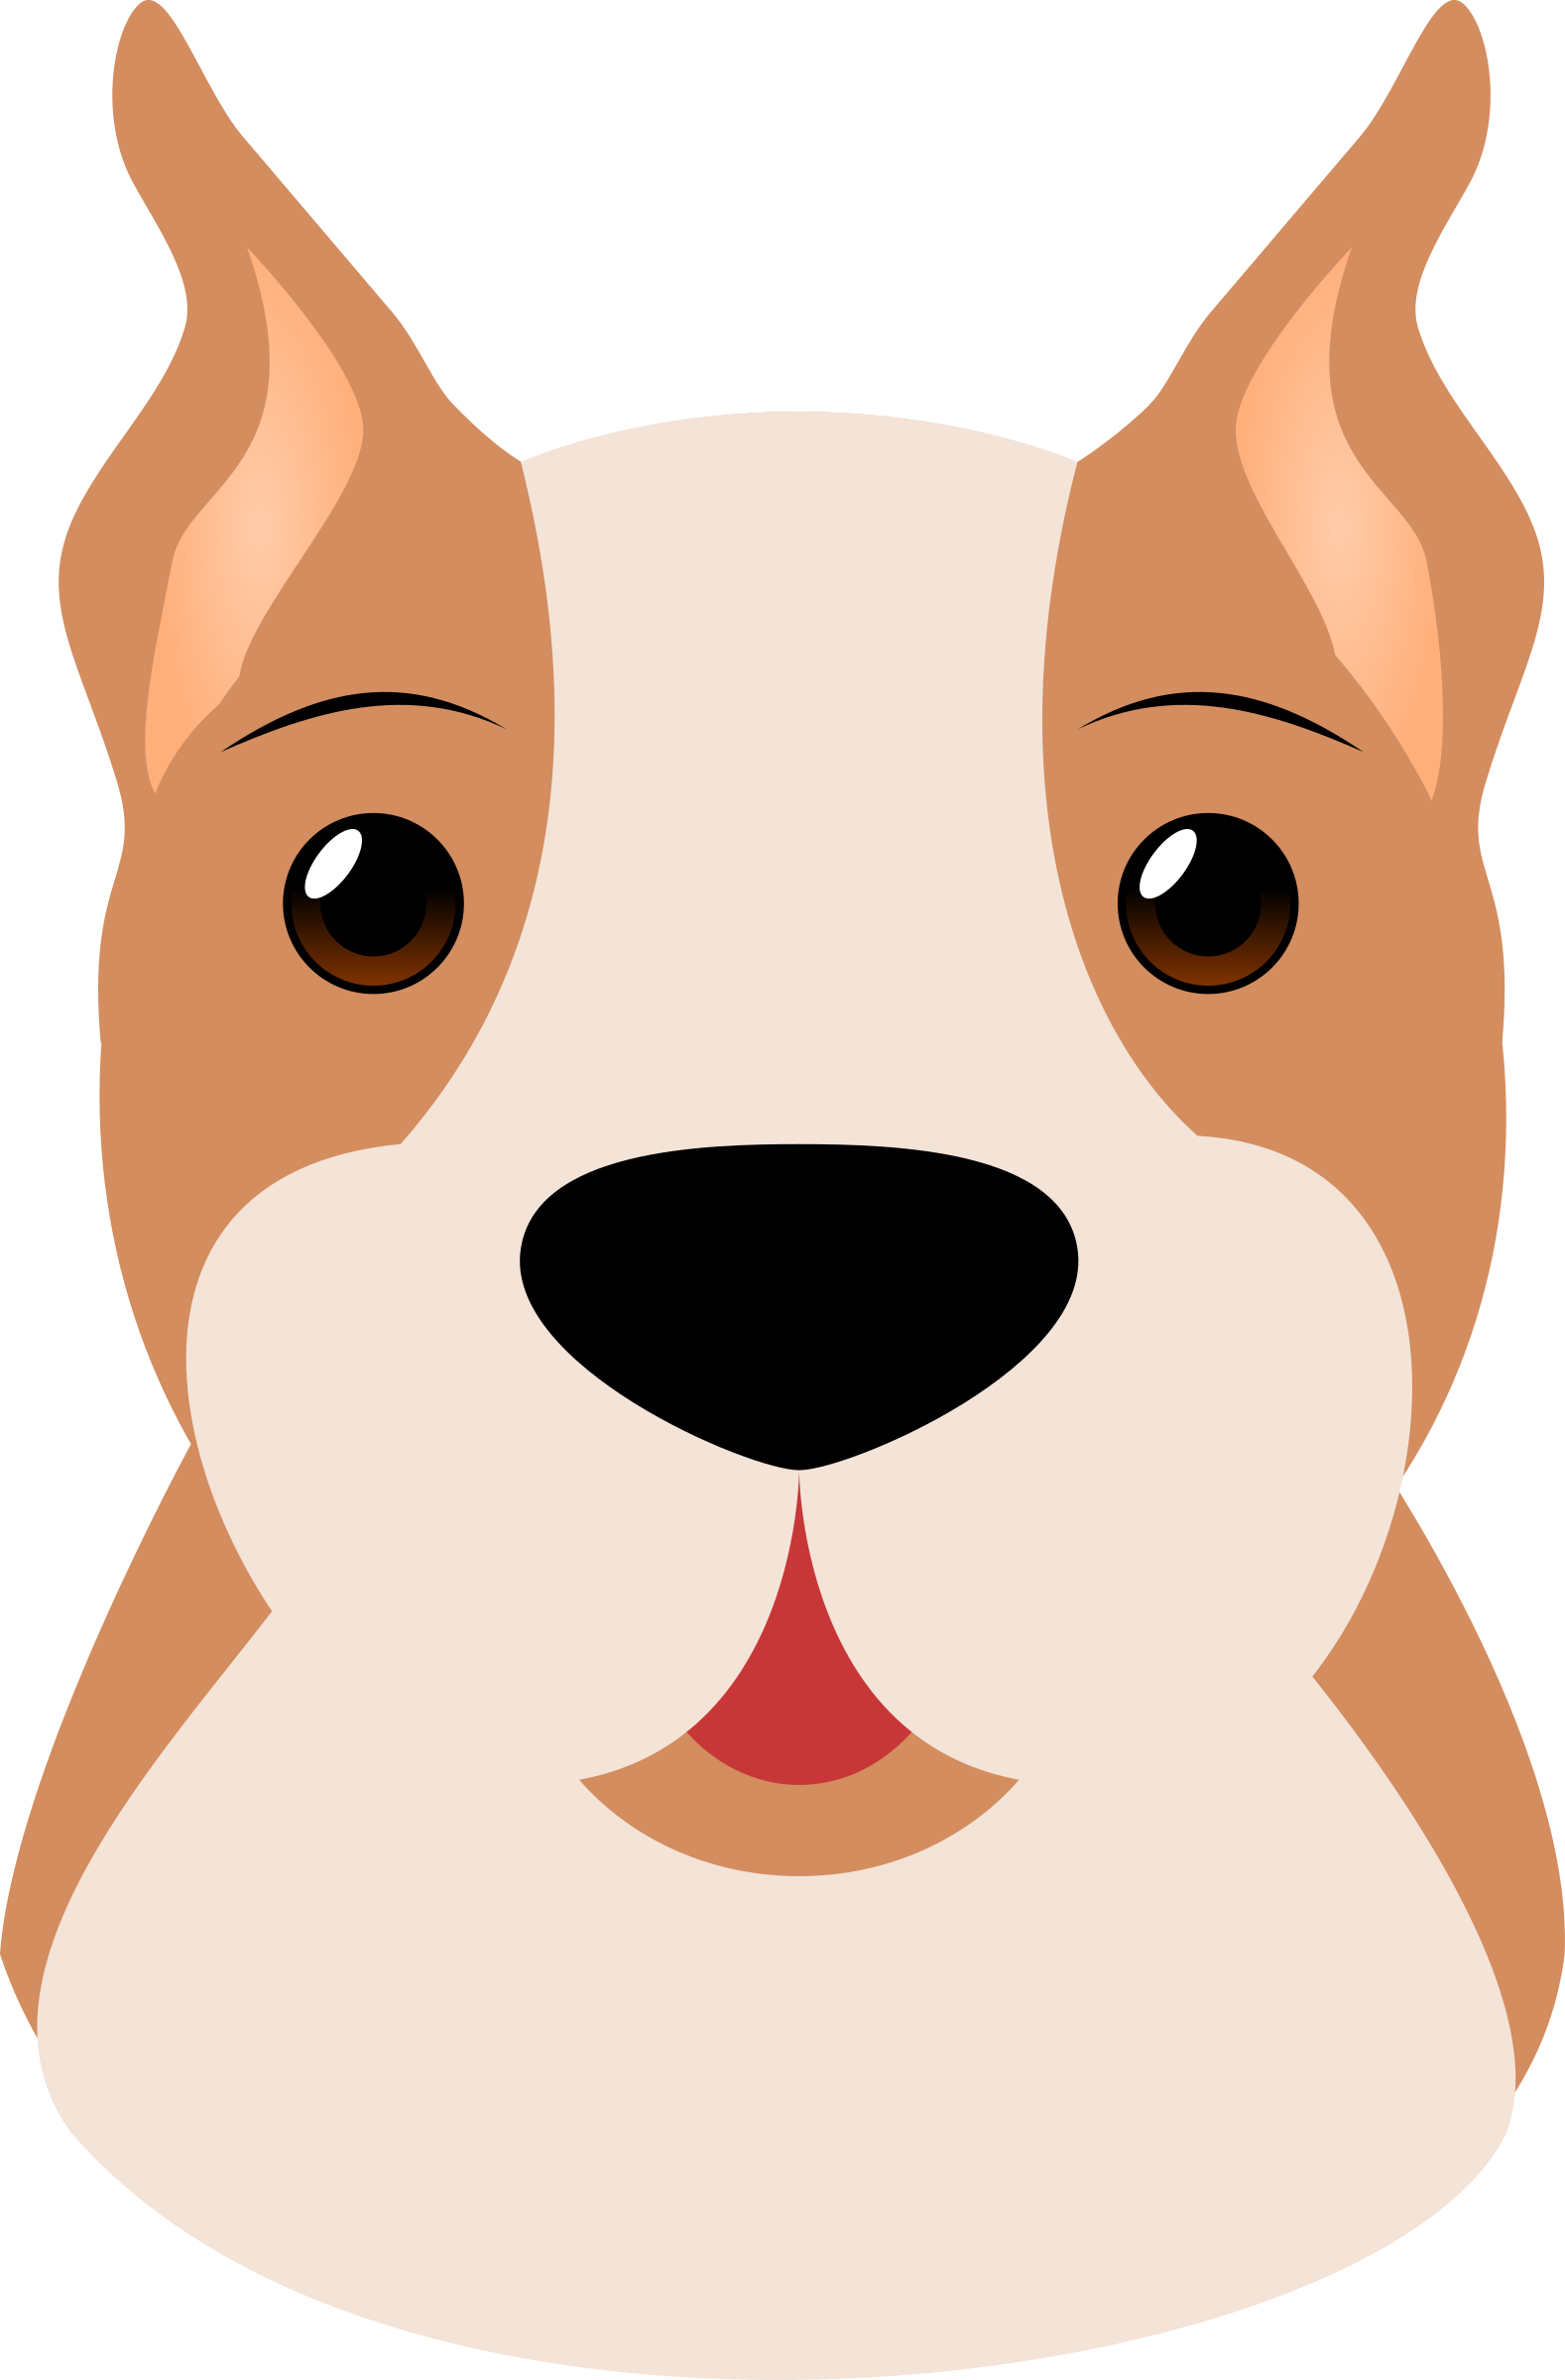 free vector clipart dogs - photo #39